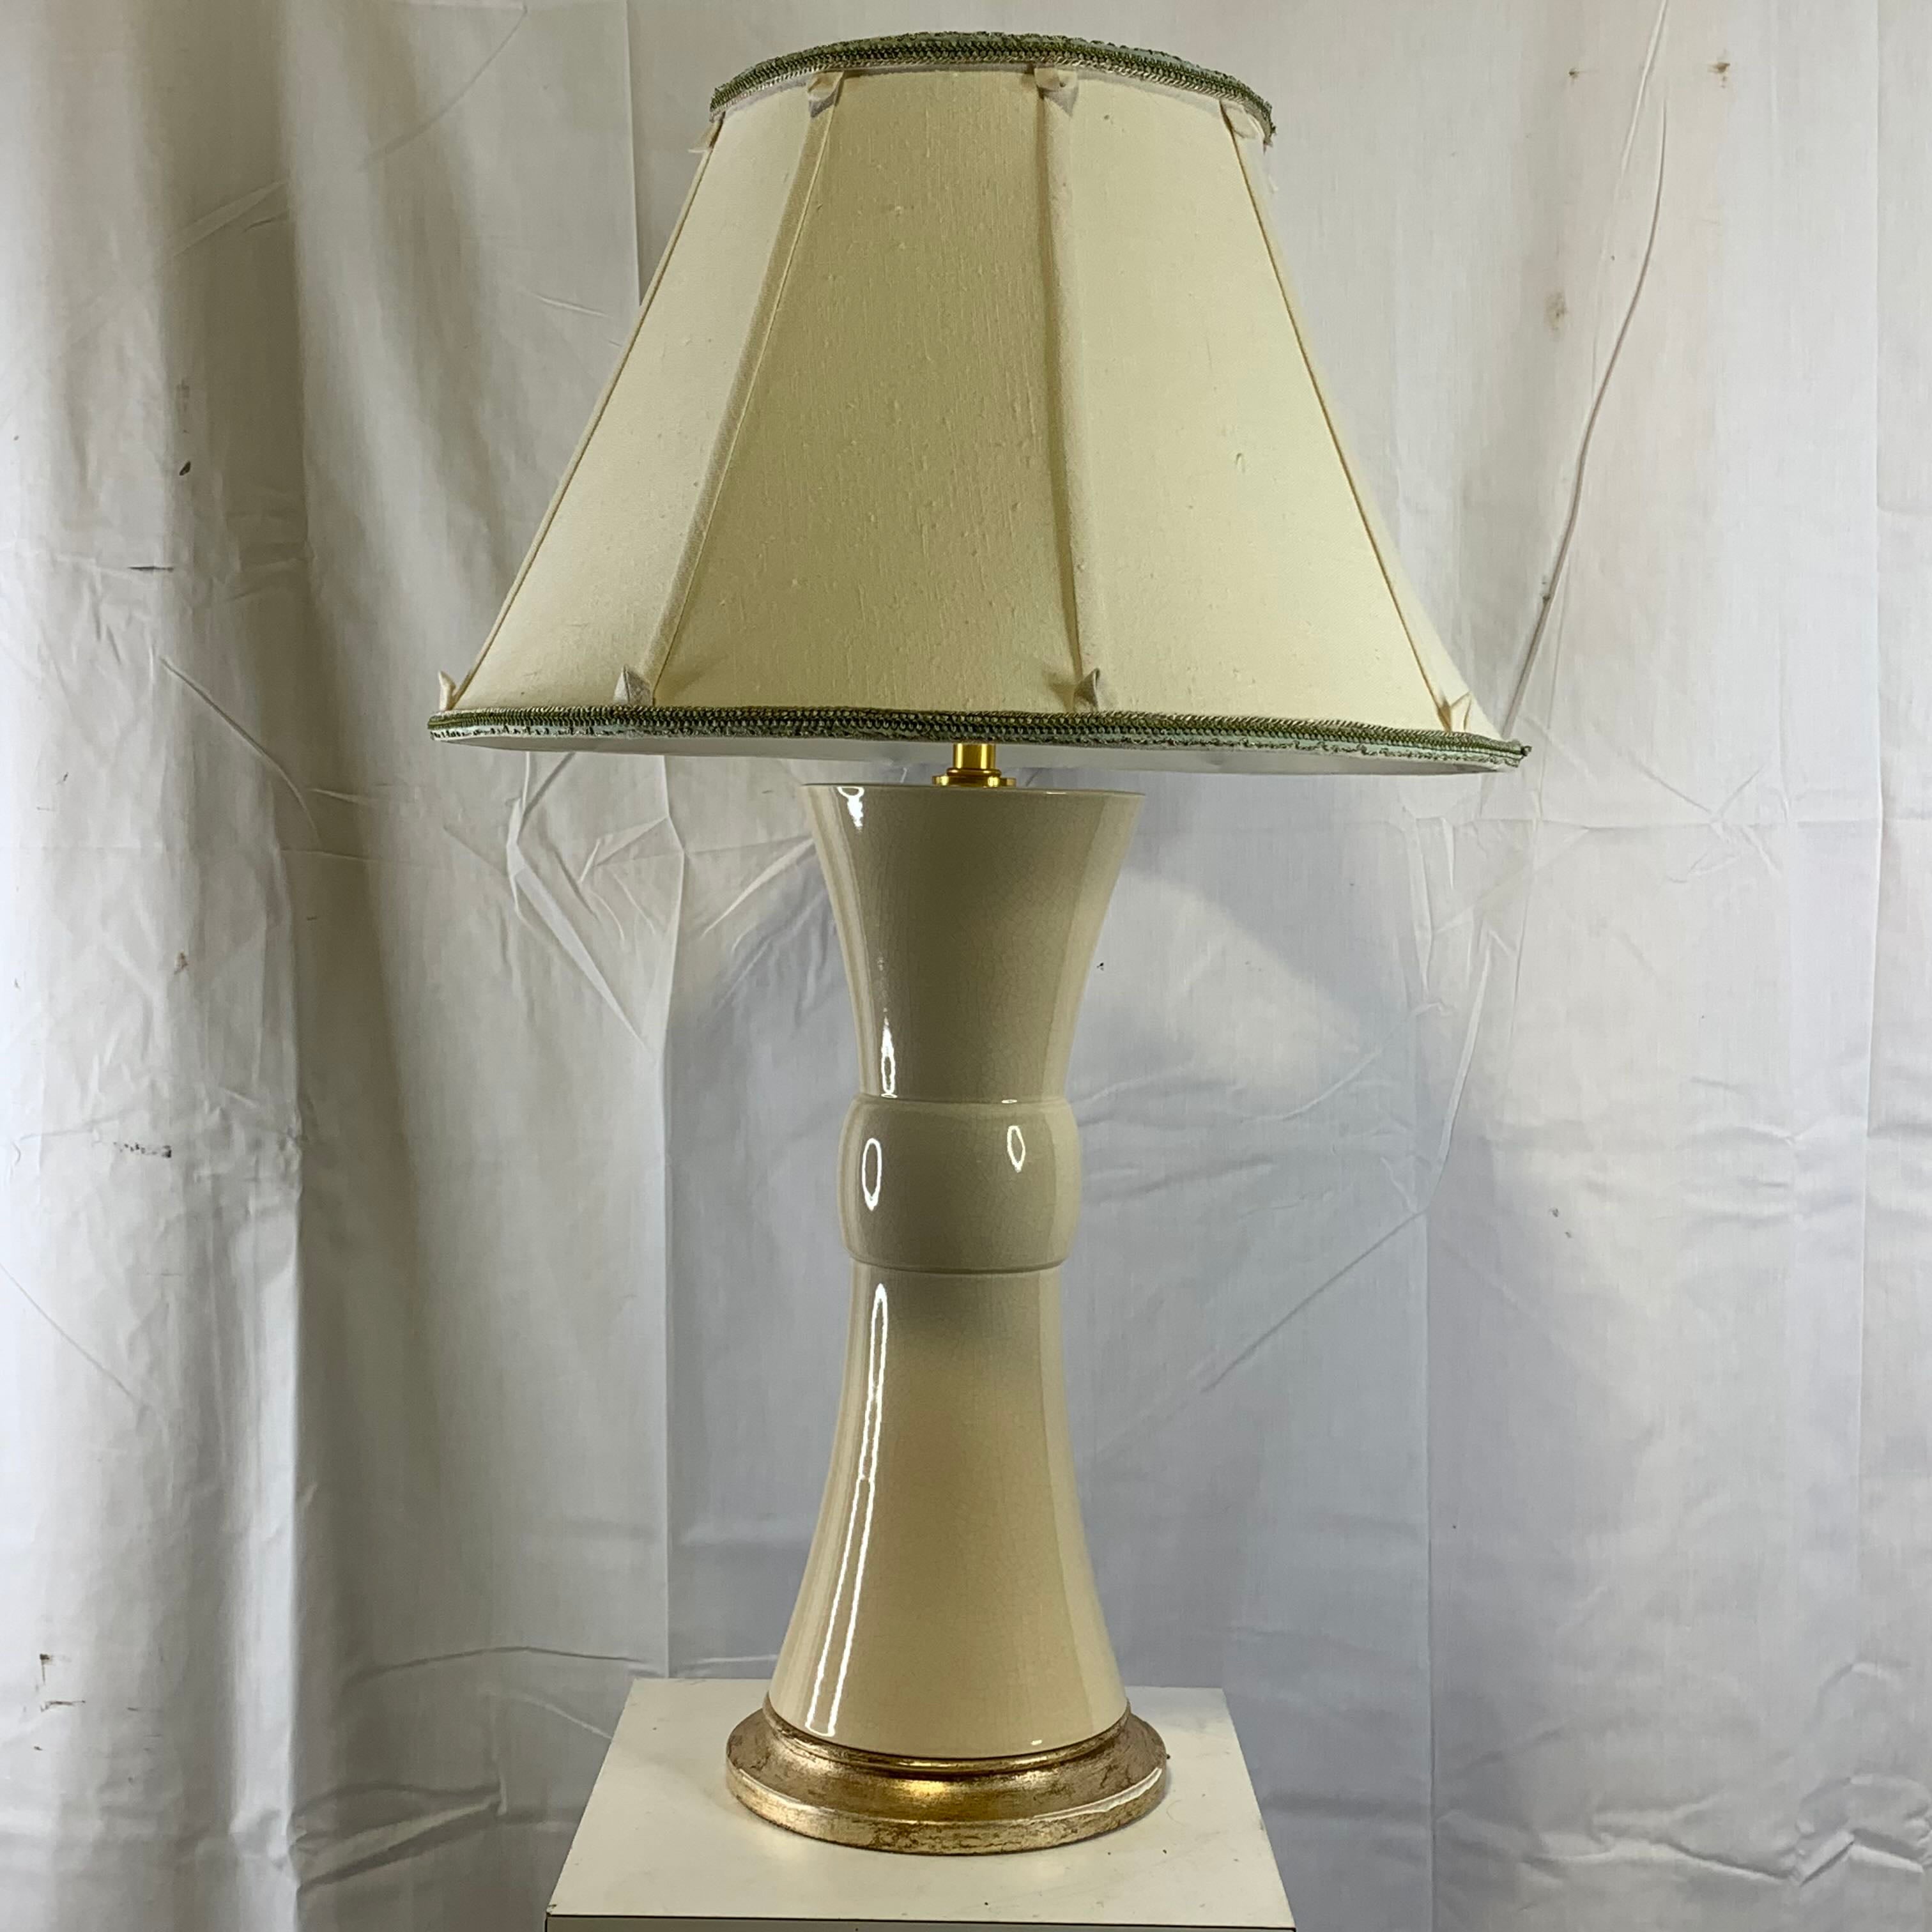 19.5" Diameter x 29.5" Baker Furniture Oatmeal Crackle Ceramic with Shade Table Lamp